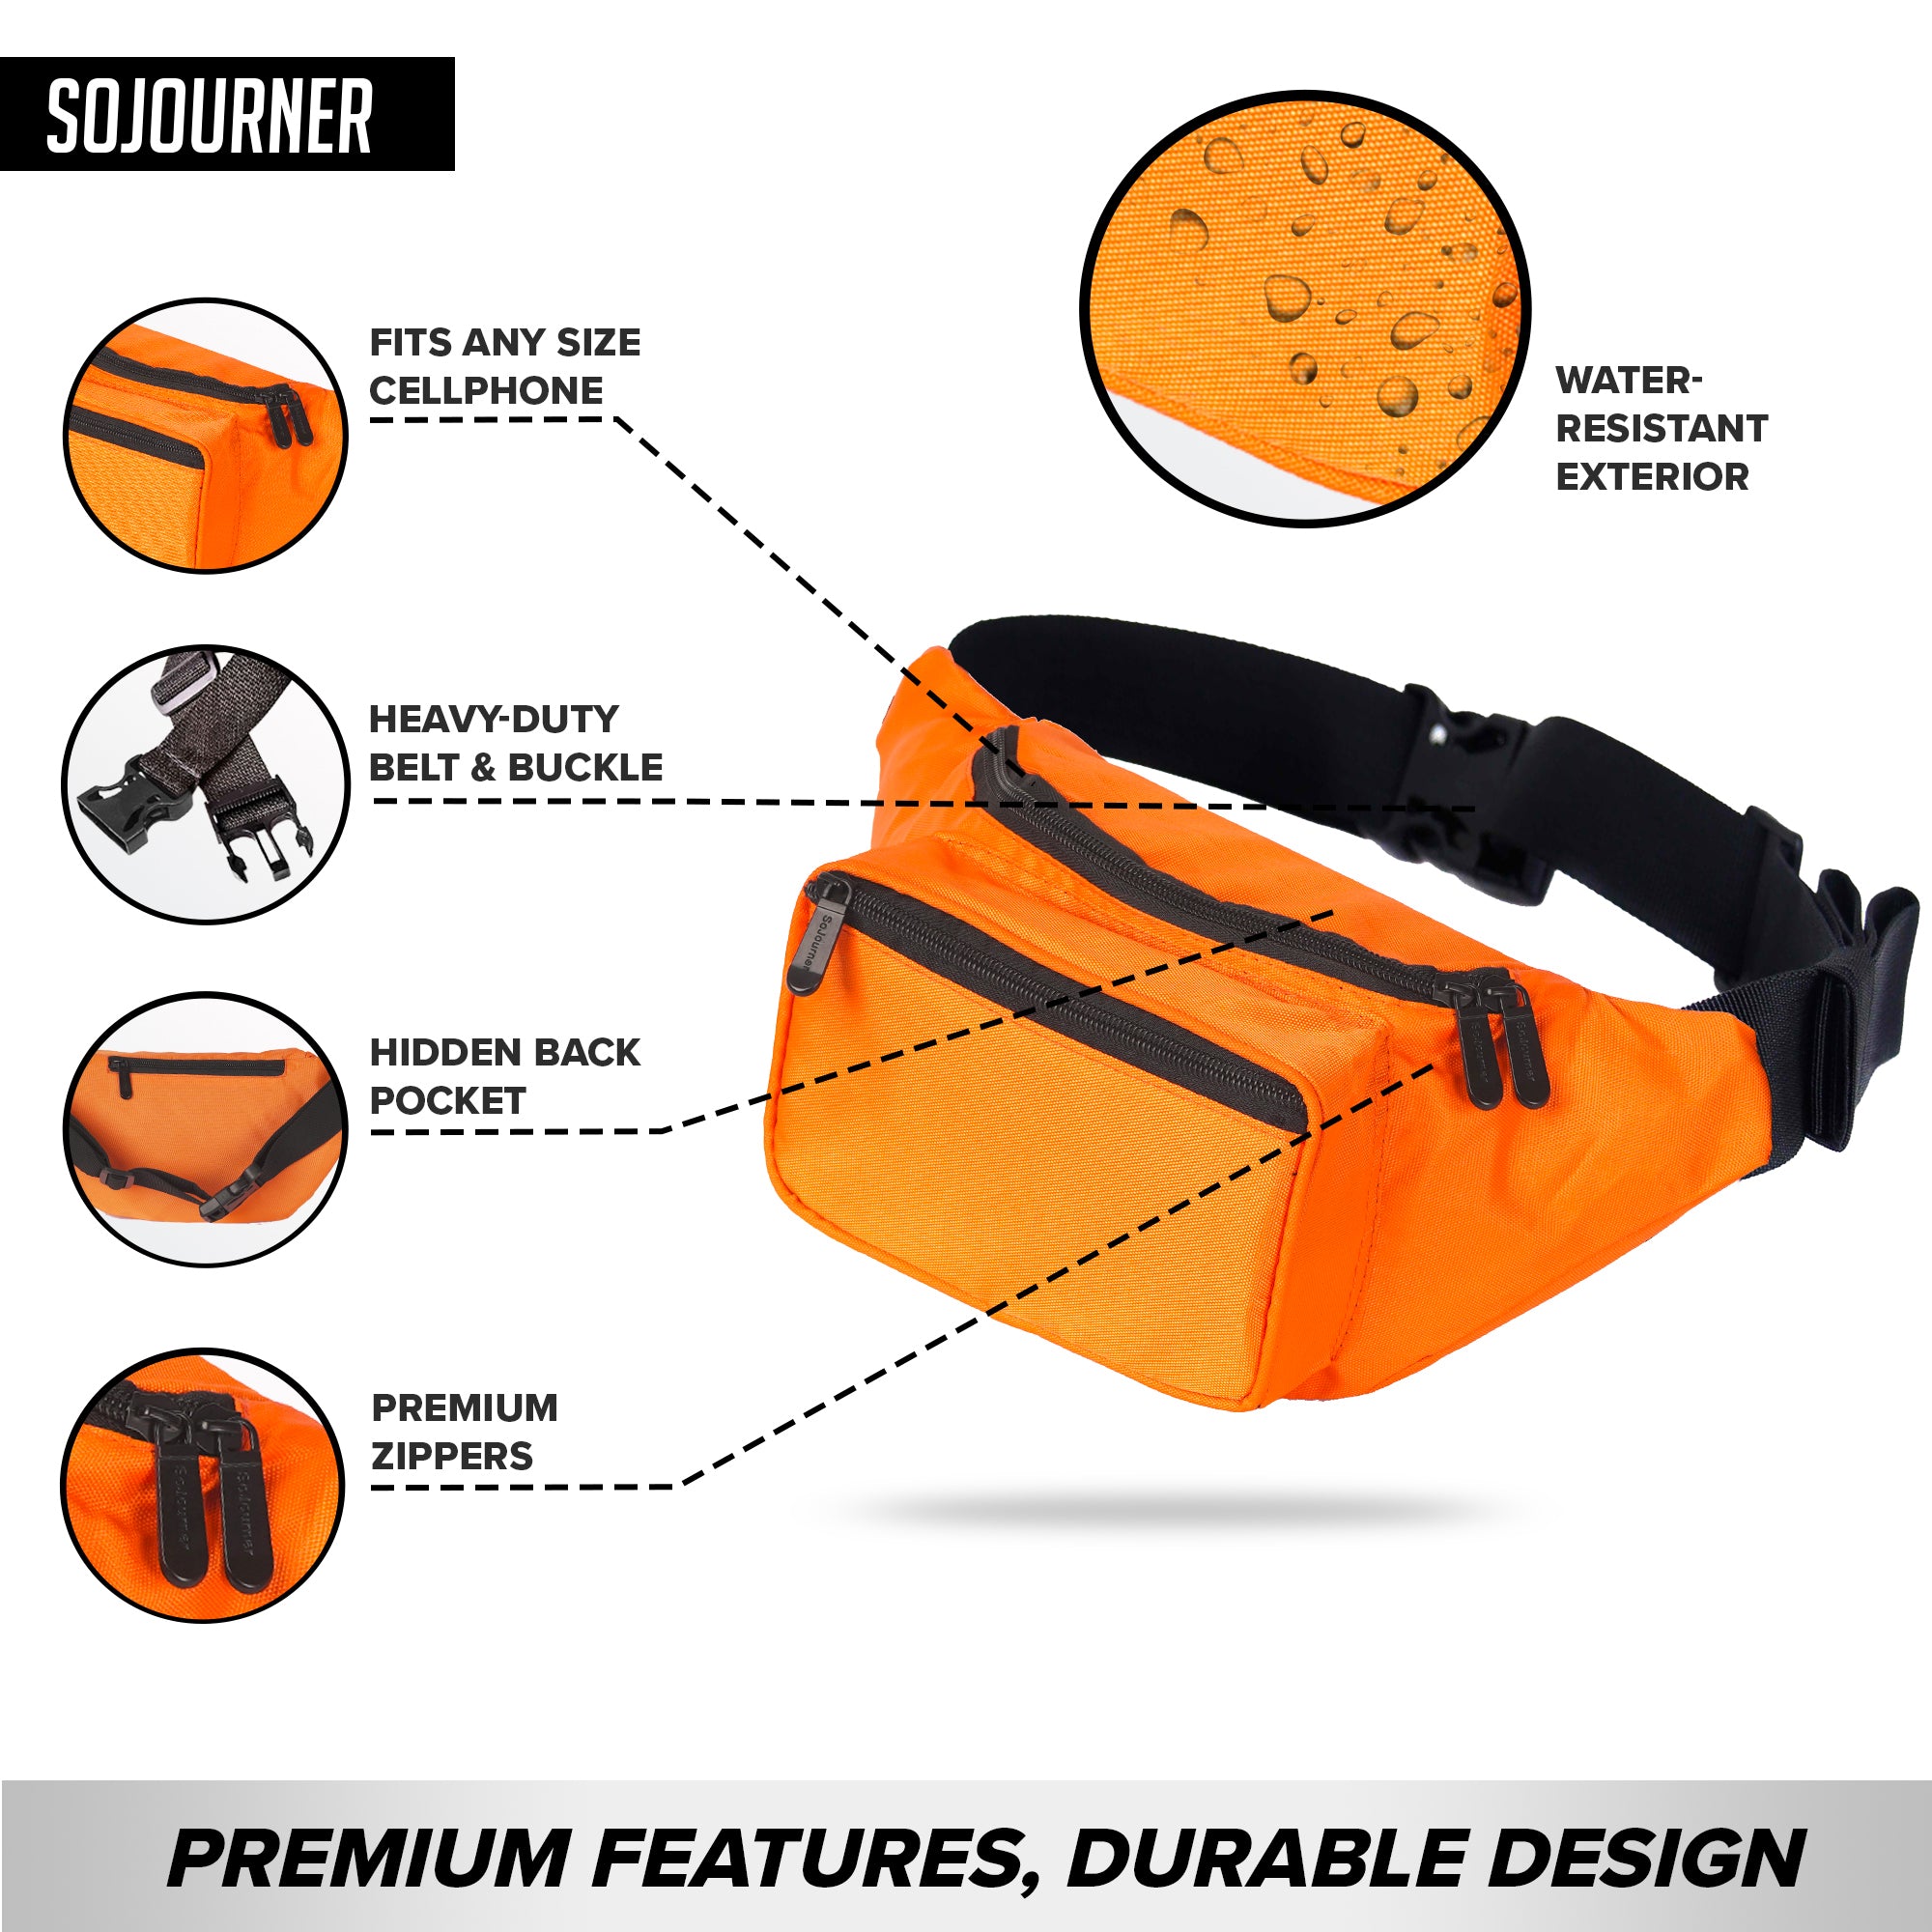 Fanny Pack (Solids)